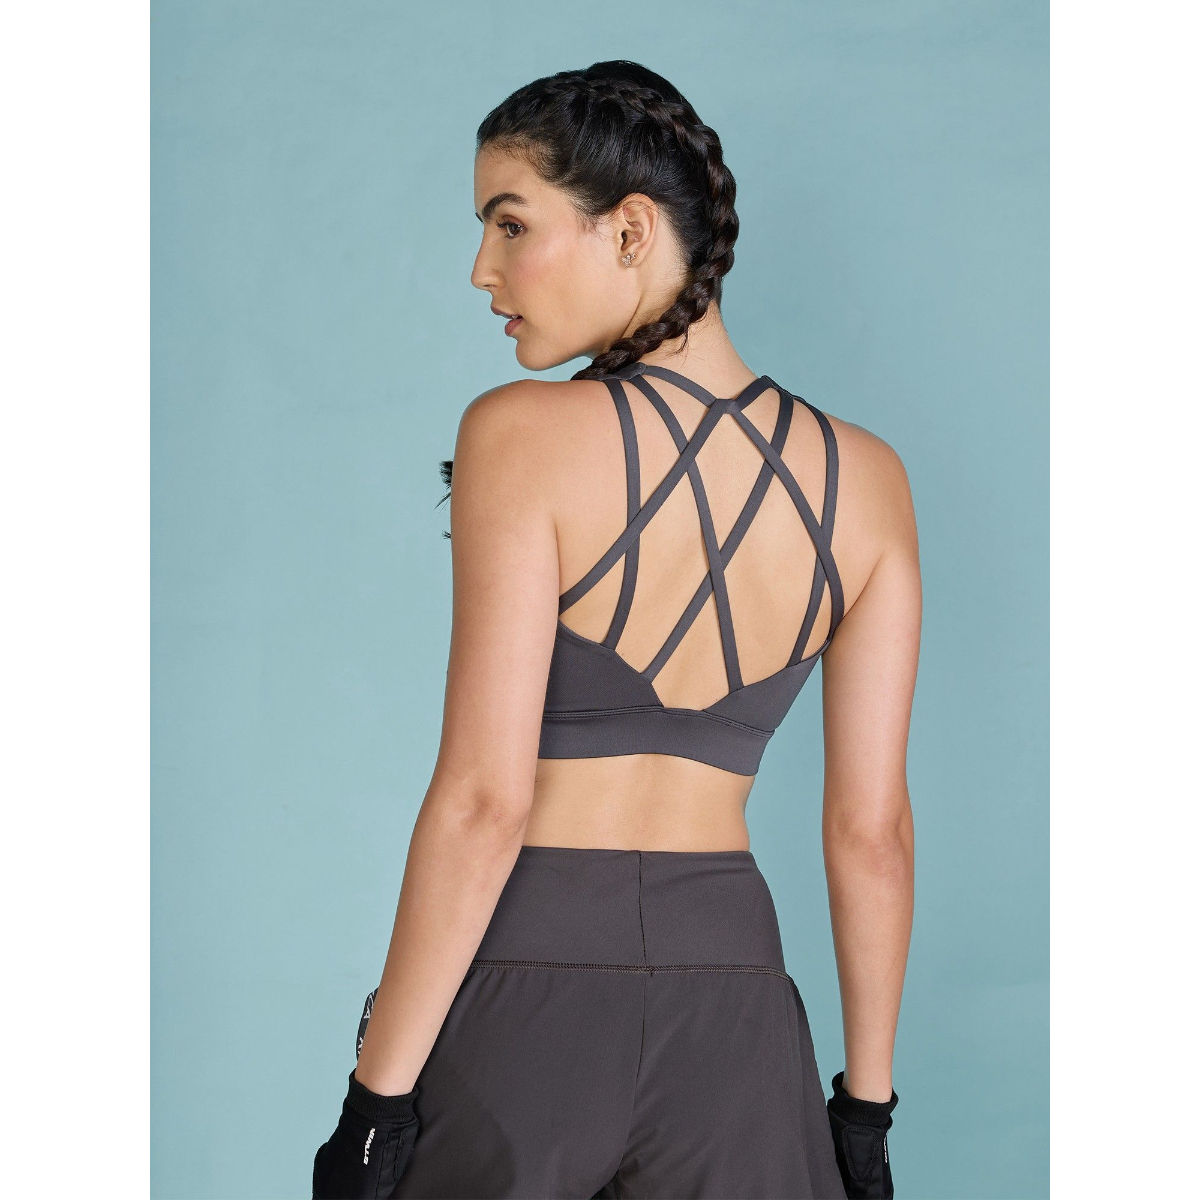 Removable Nykaa Sports Bra For Women Tight Elastic Bralette Crop